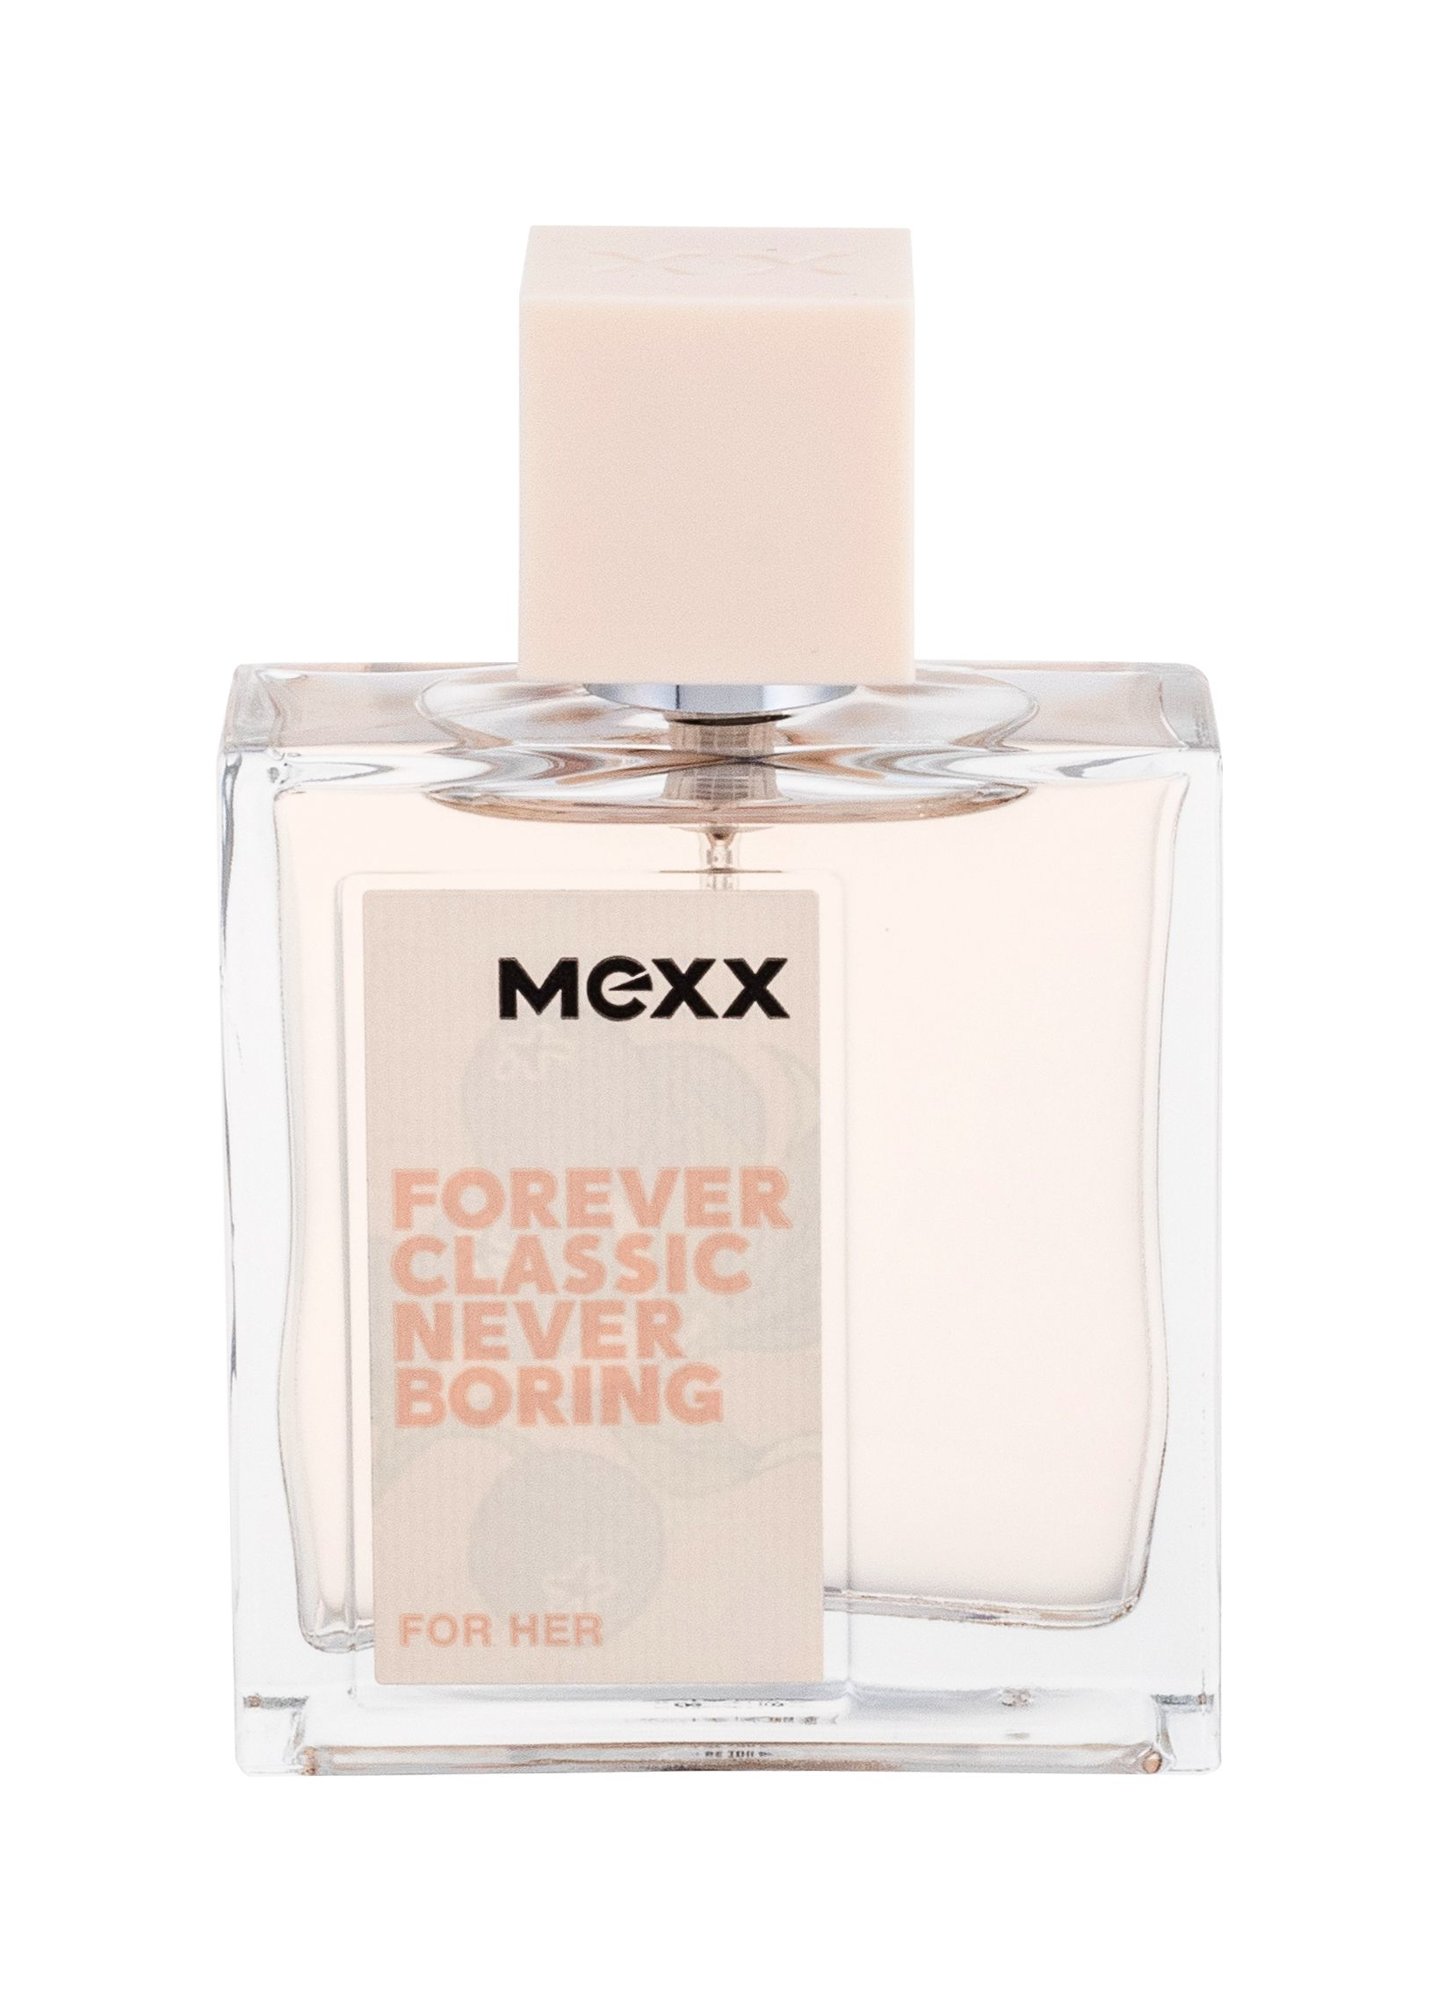 Mexx Forever Classic Never Boring for Her, Toaletní voda 50ml